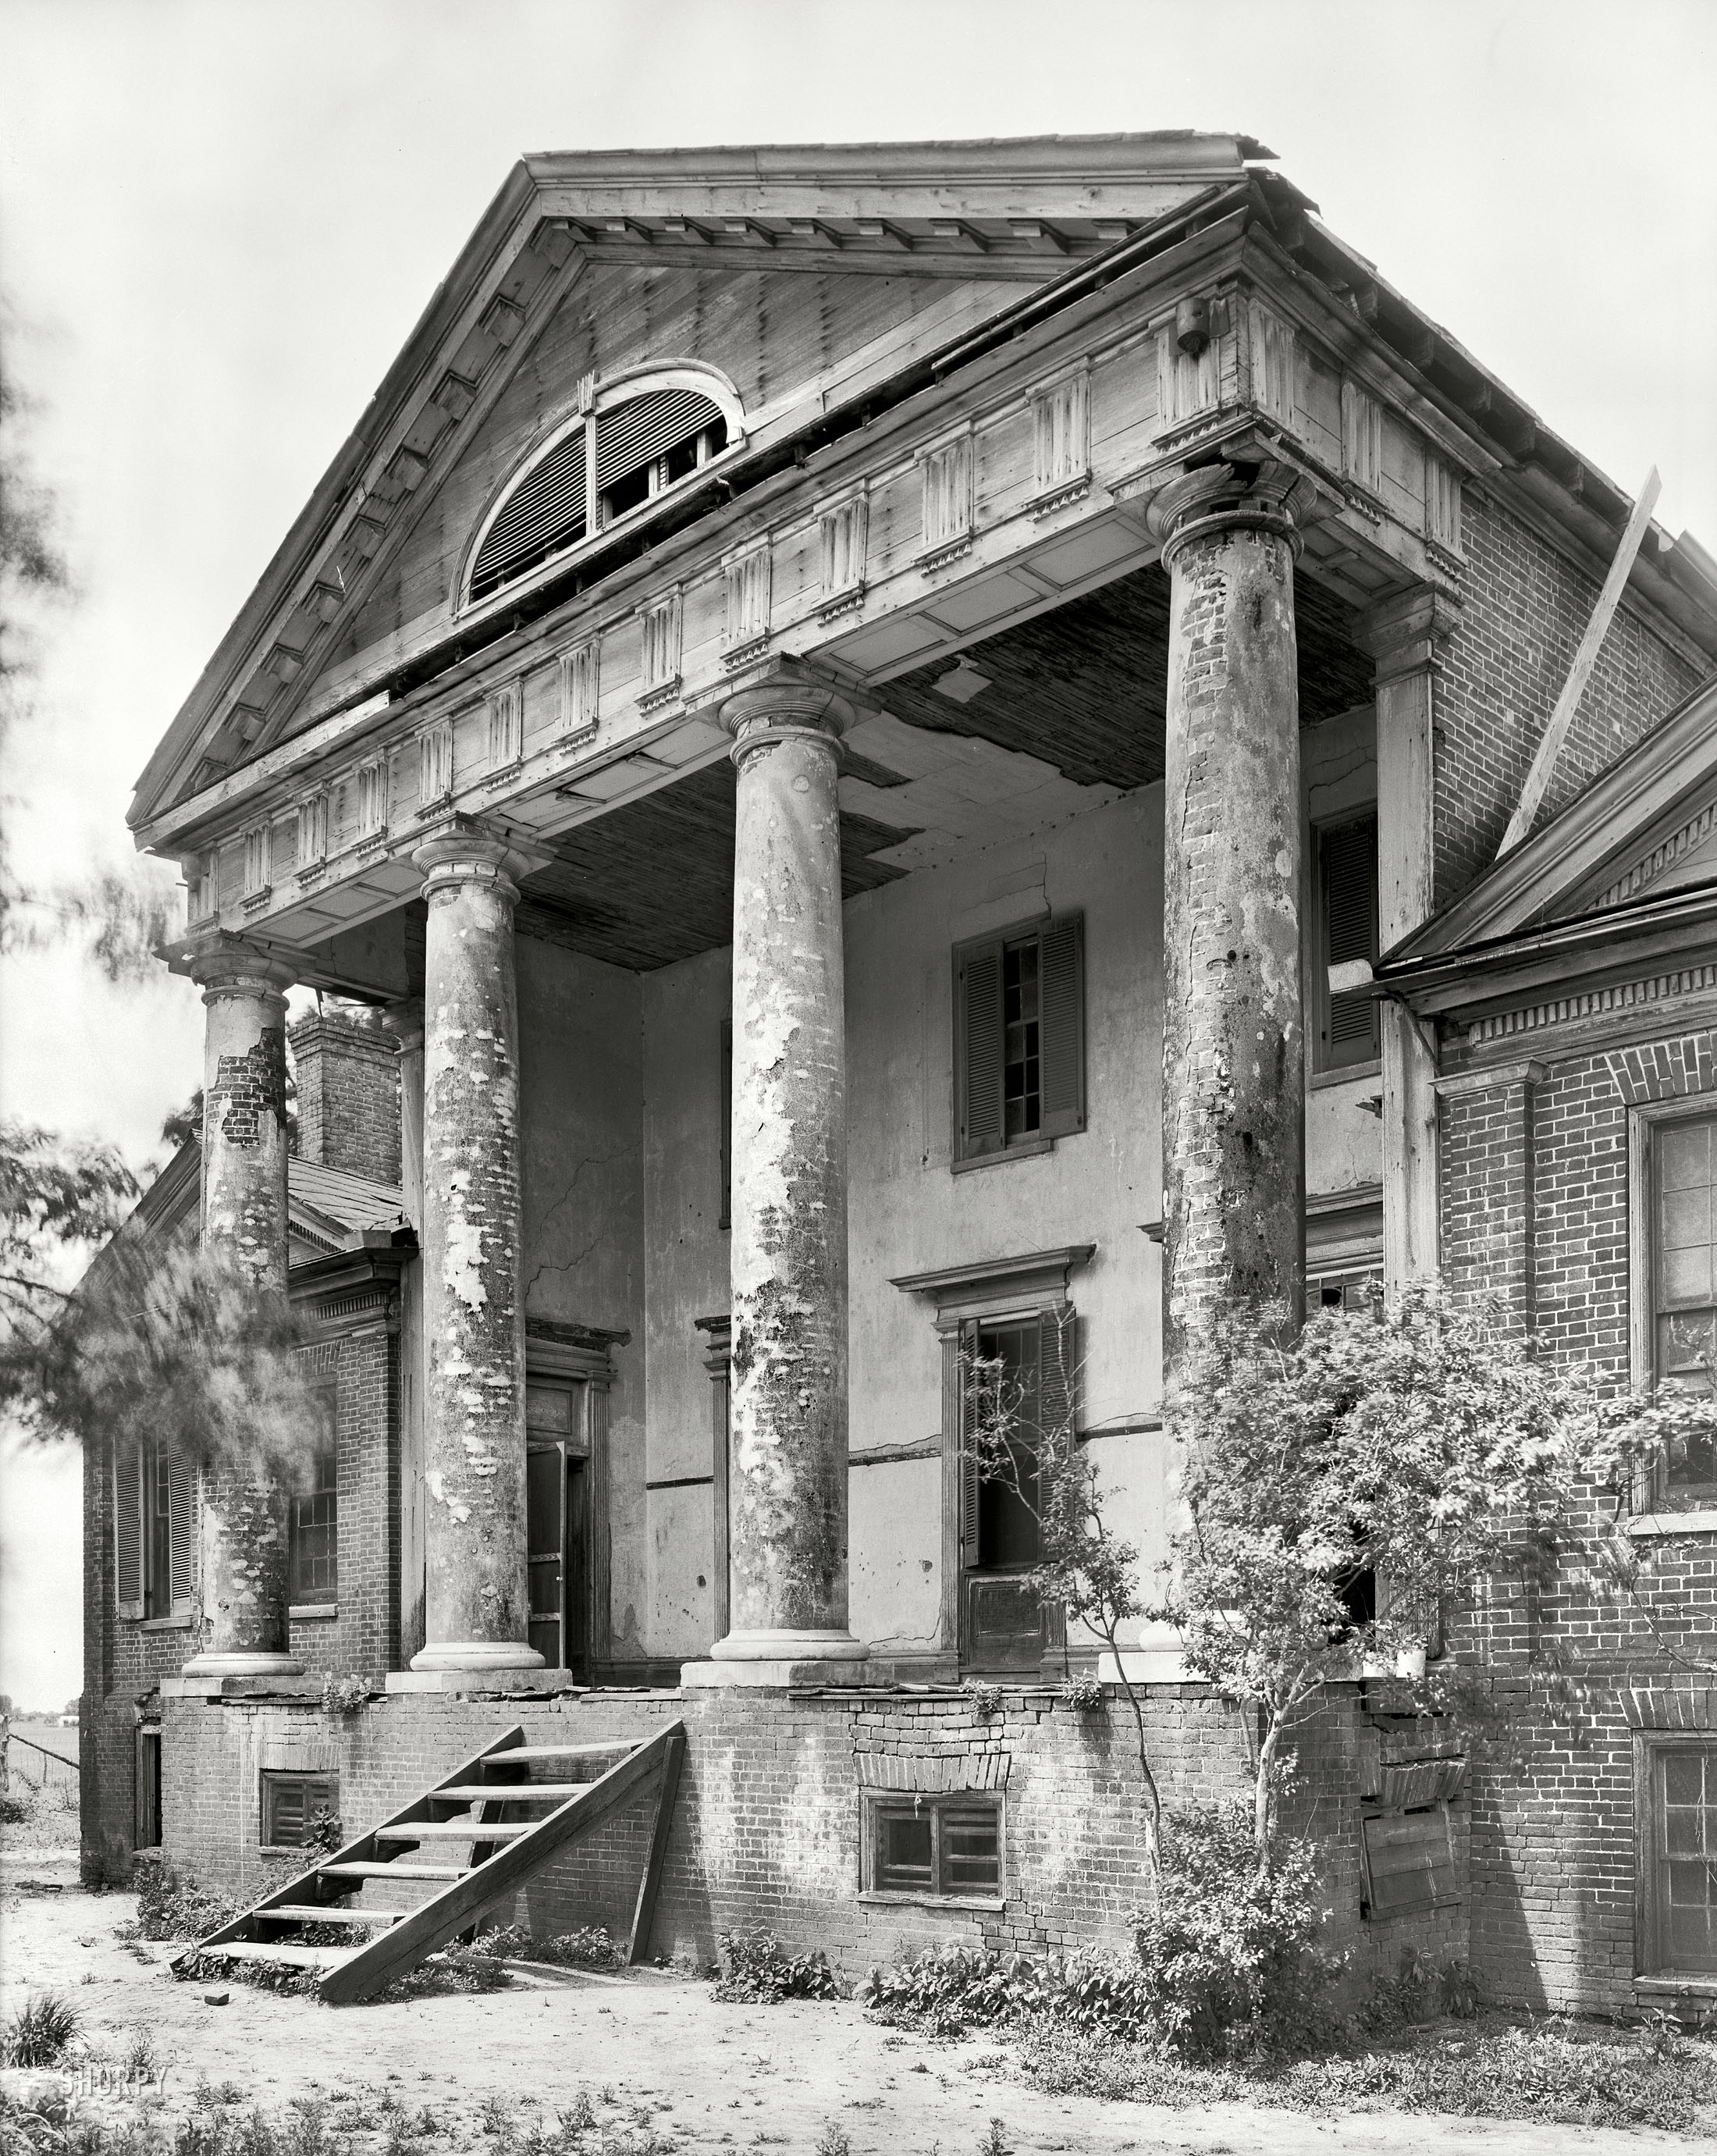 Lawrence County, Alabama, 1939. "Freeman Goode Mansion (Mrs. William Skeggs estate). Town Creek vicinity. House built 1821 by the Rev. Turner Saunders." 8x10 acetate negative by Frances Benjamin Johnston. View full size.